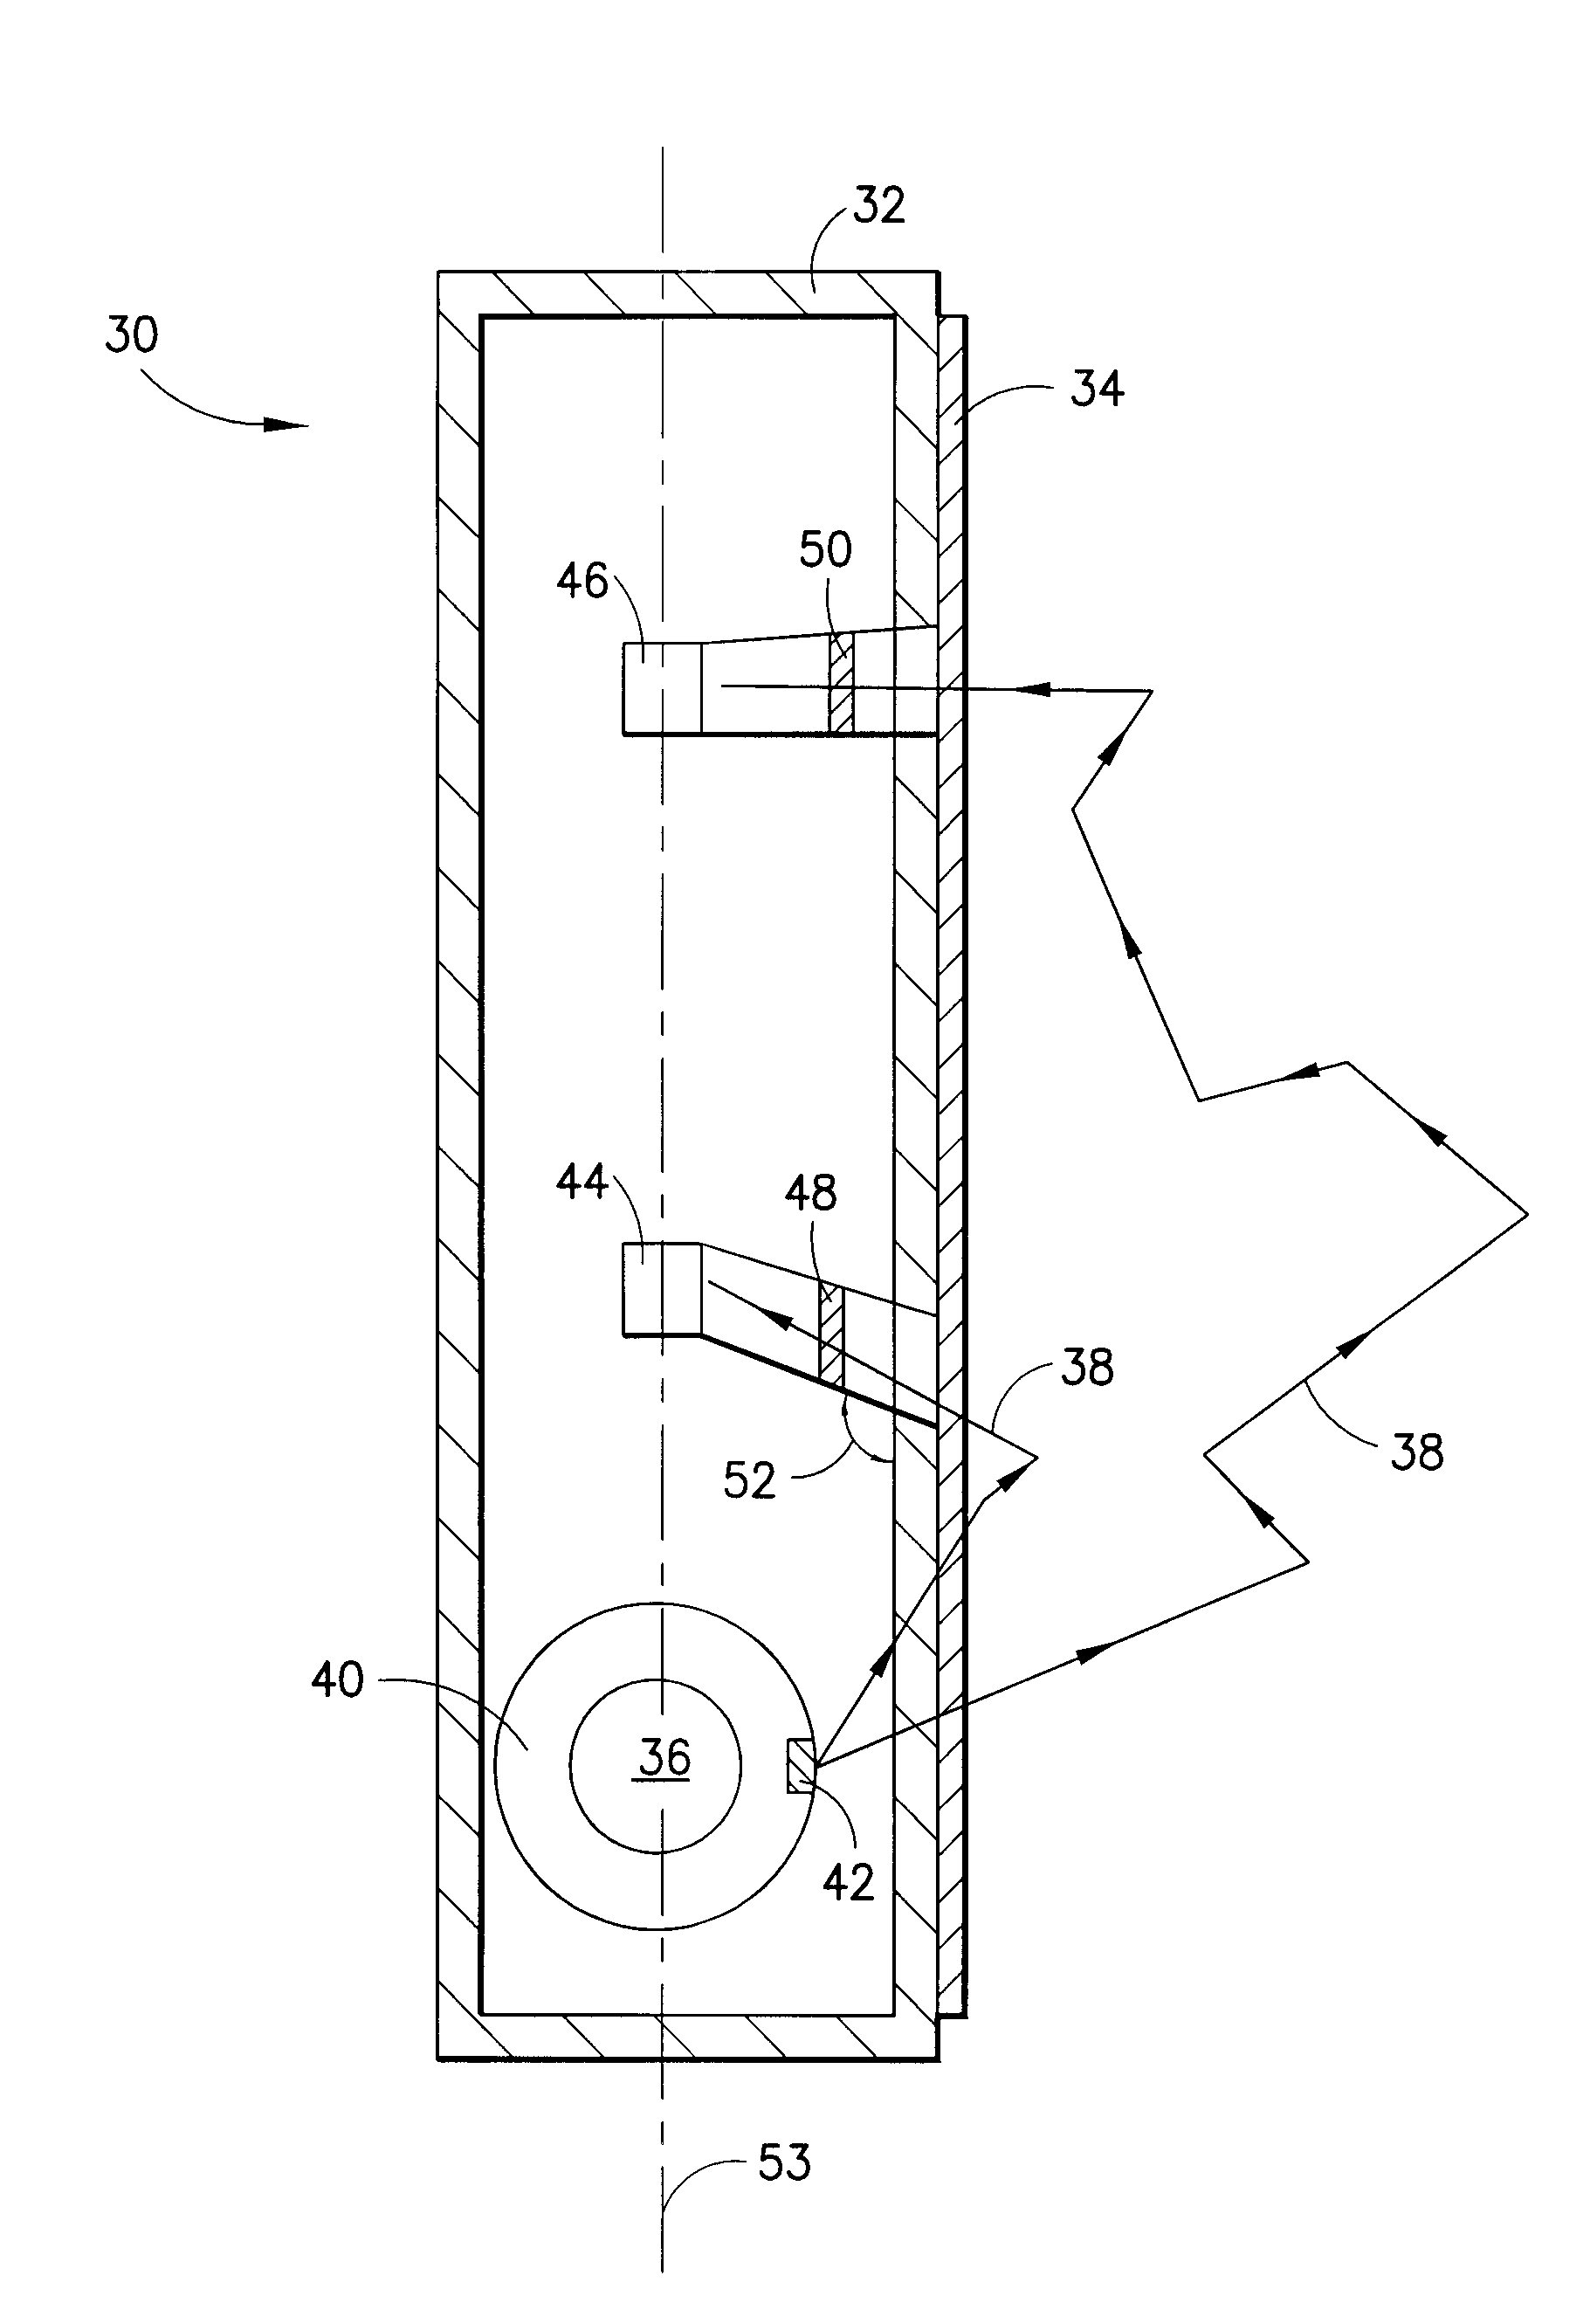 Method of extracting formation density and pe using a pulsed accelerator based litho-density tool